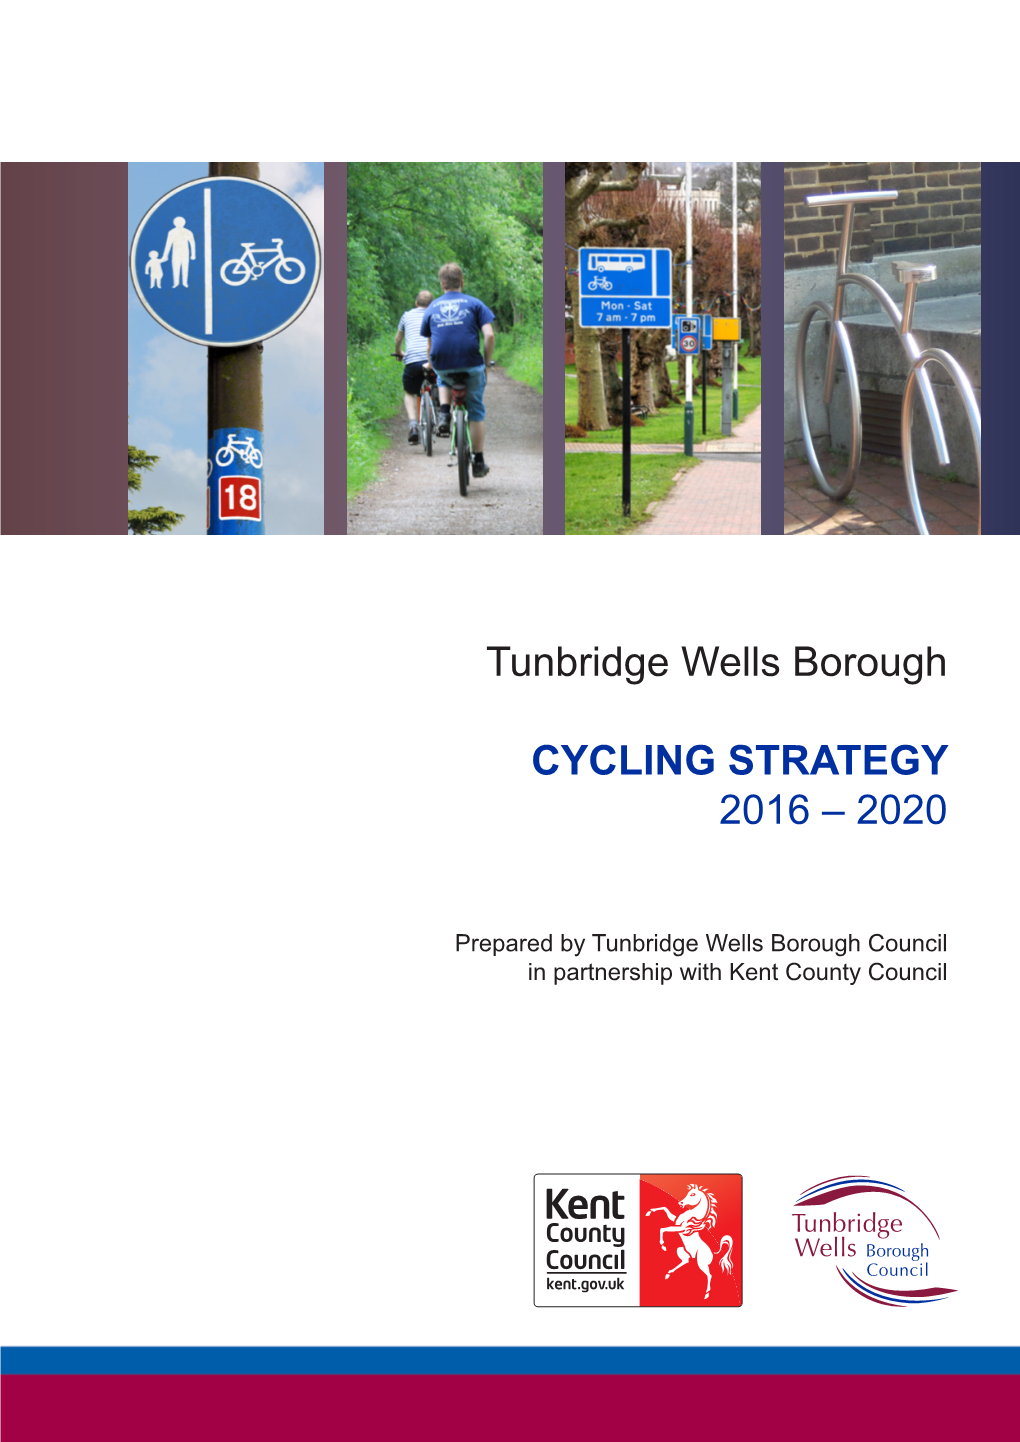 Cycling Strategy 2016 – 2020